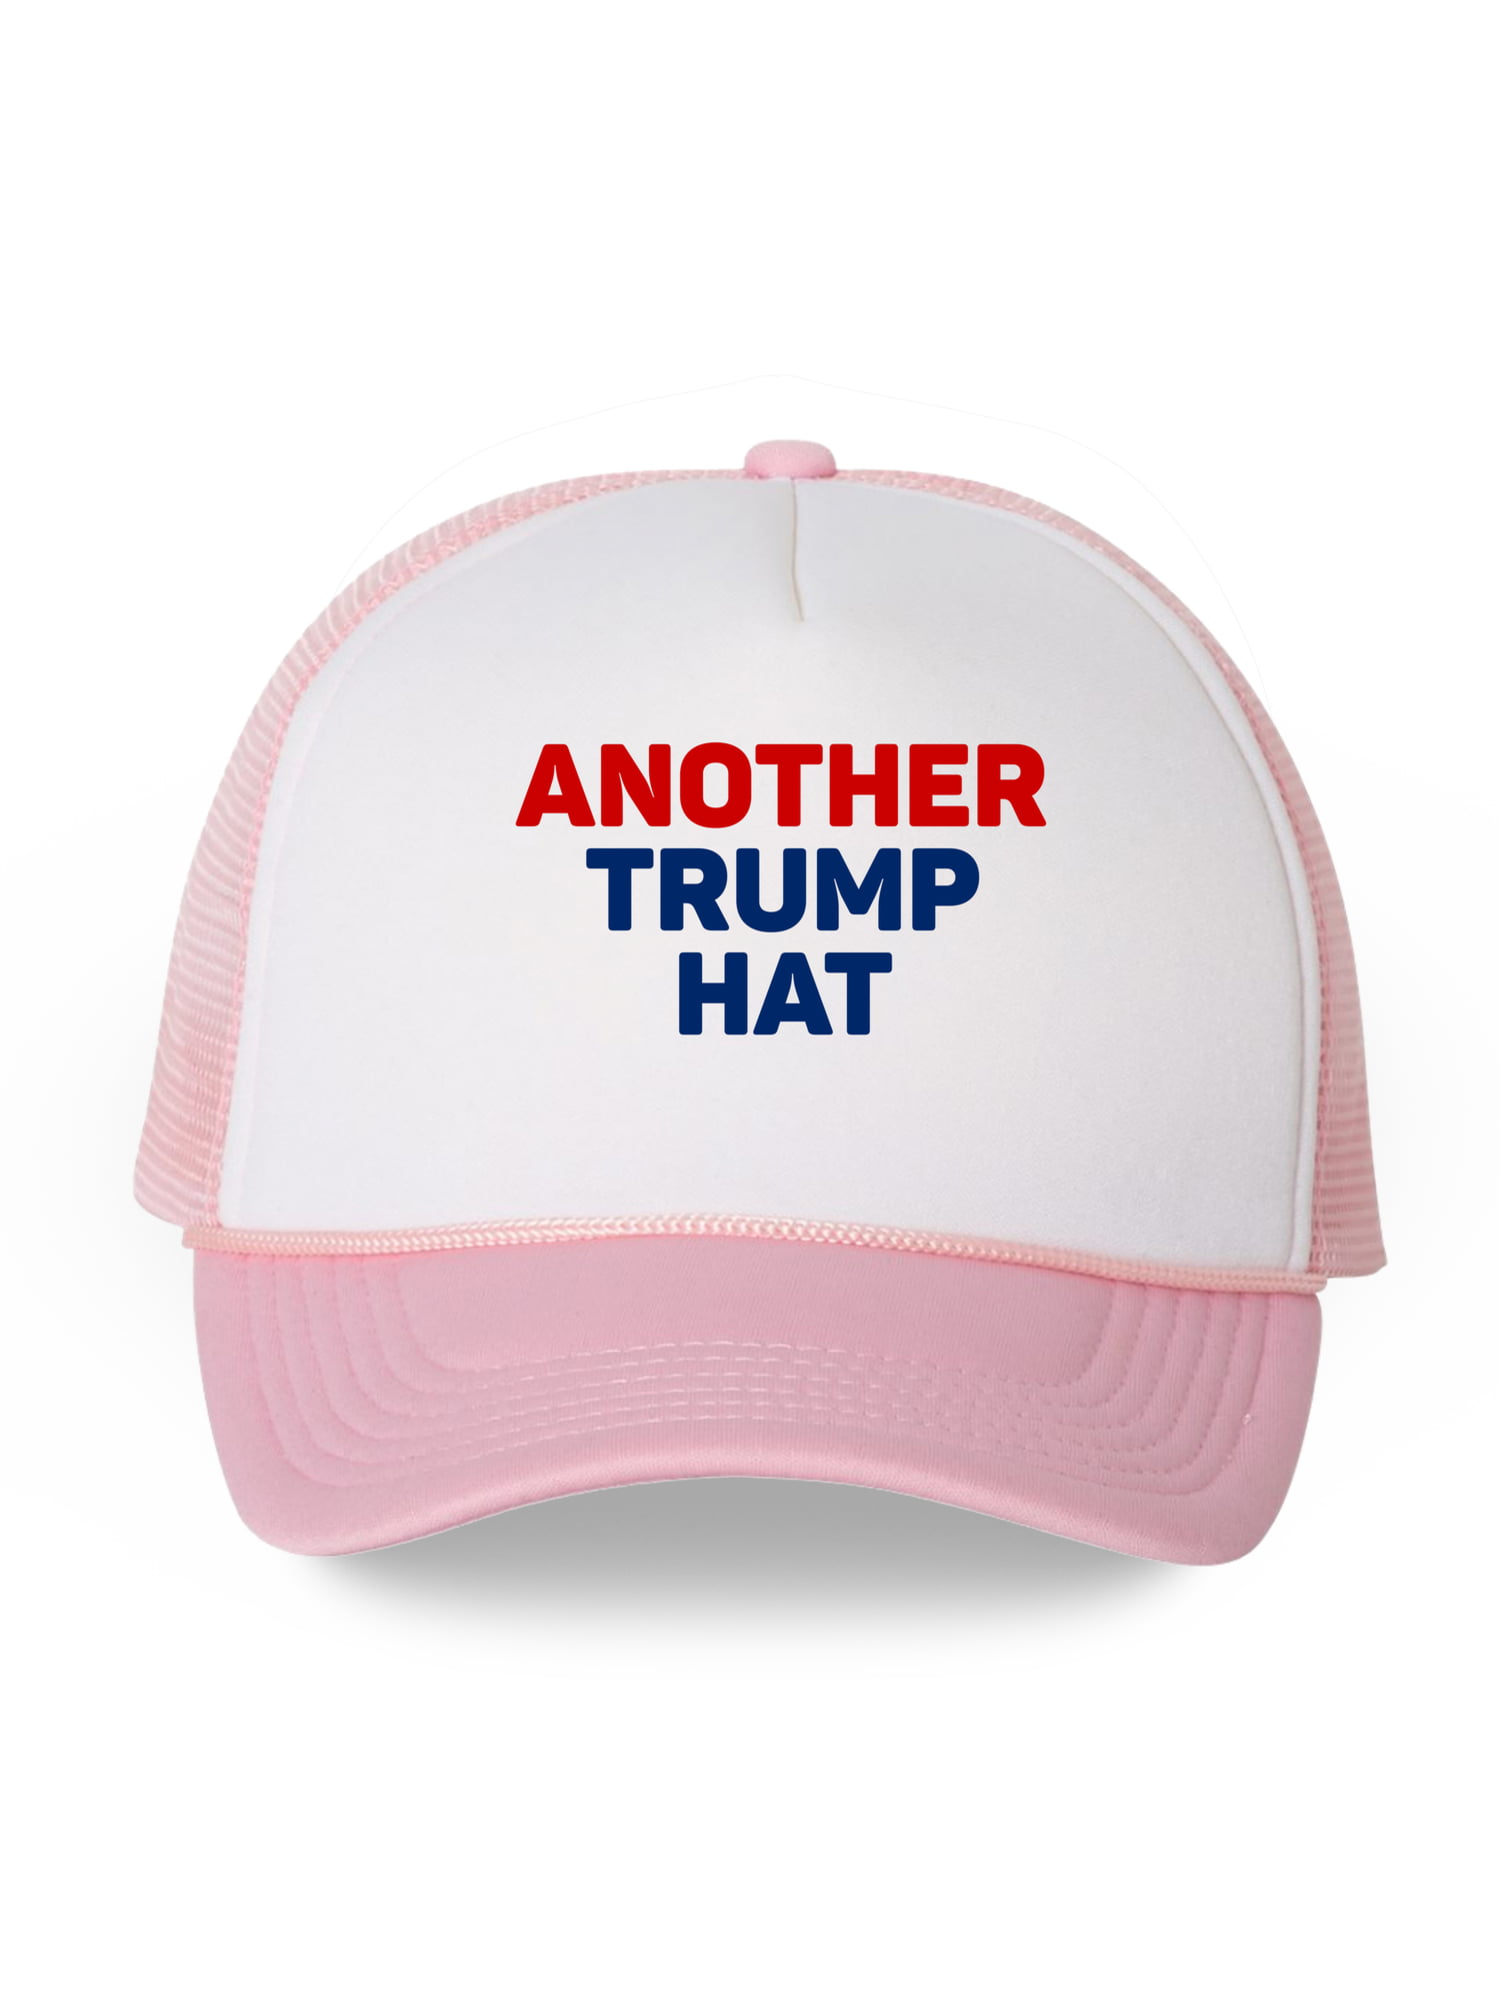 Keep America Great Donald Trump/'s 2020 Republican President Hat Pink